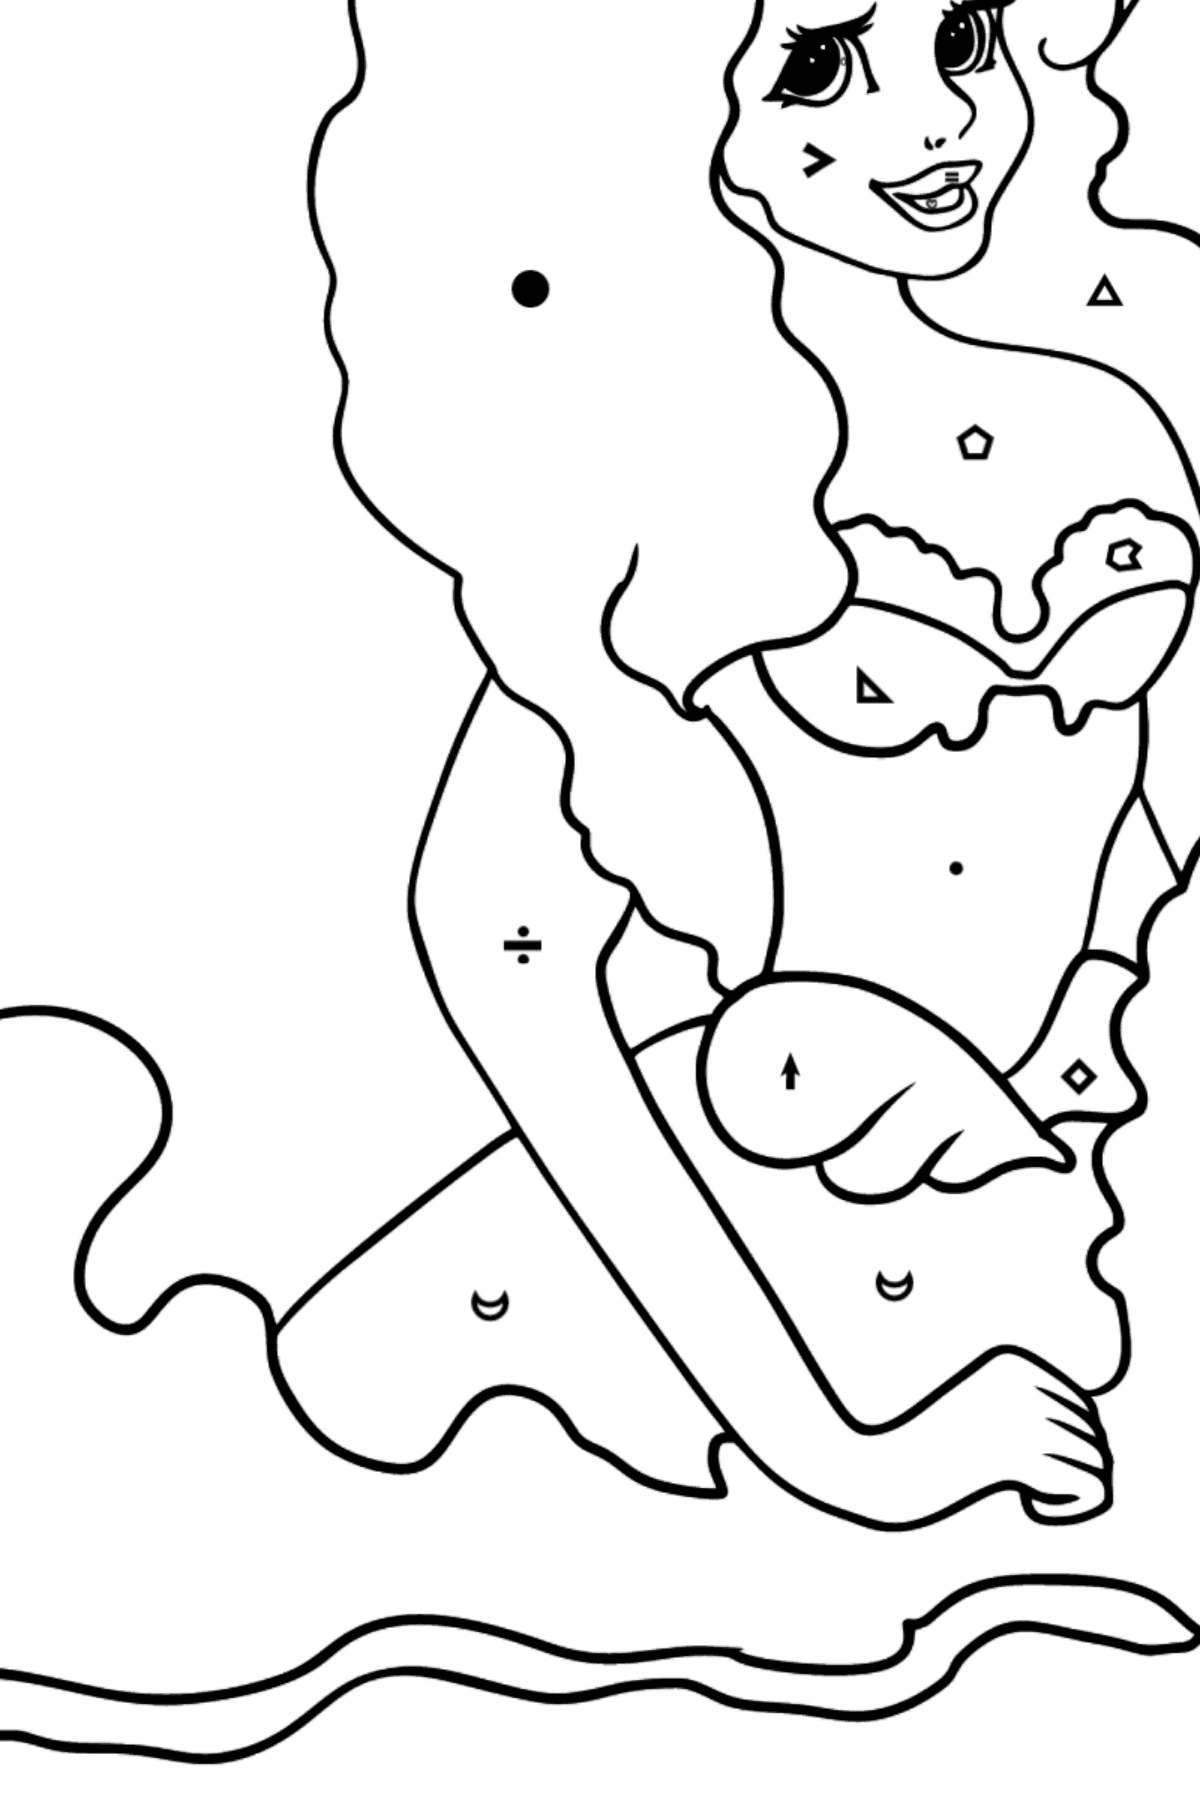 Coloring Page Mermaid on the waves - Coloring by Symbols and Geometric Shapes for Kids